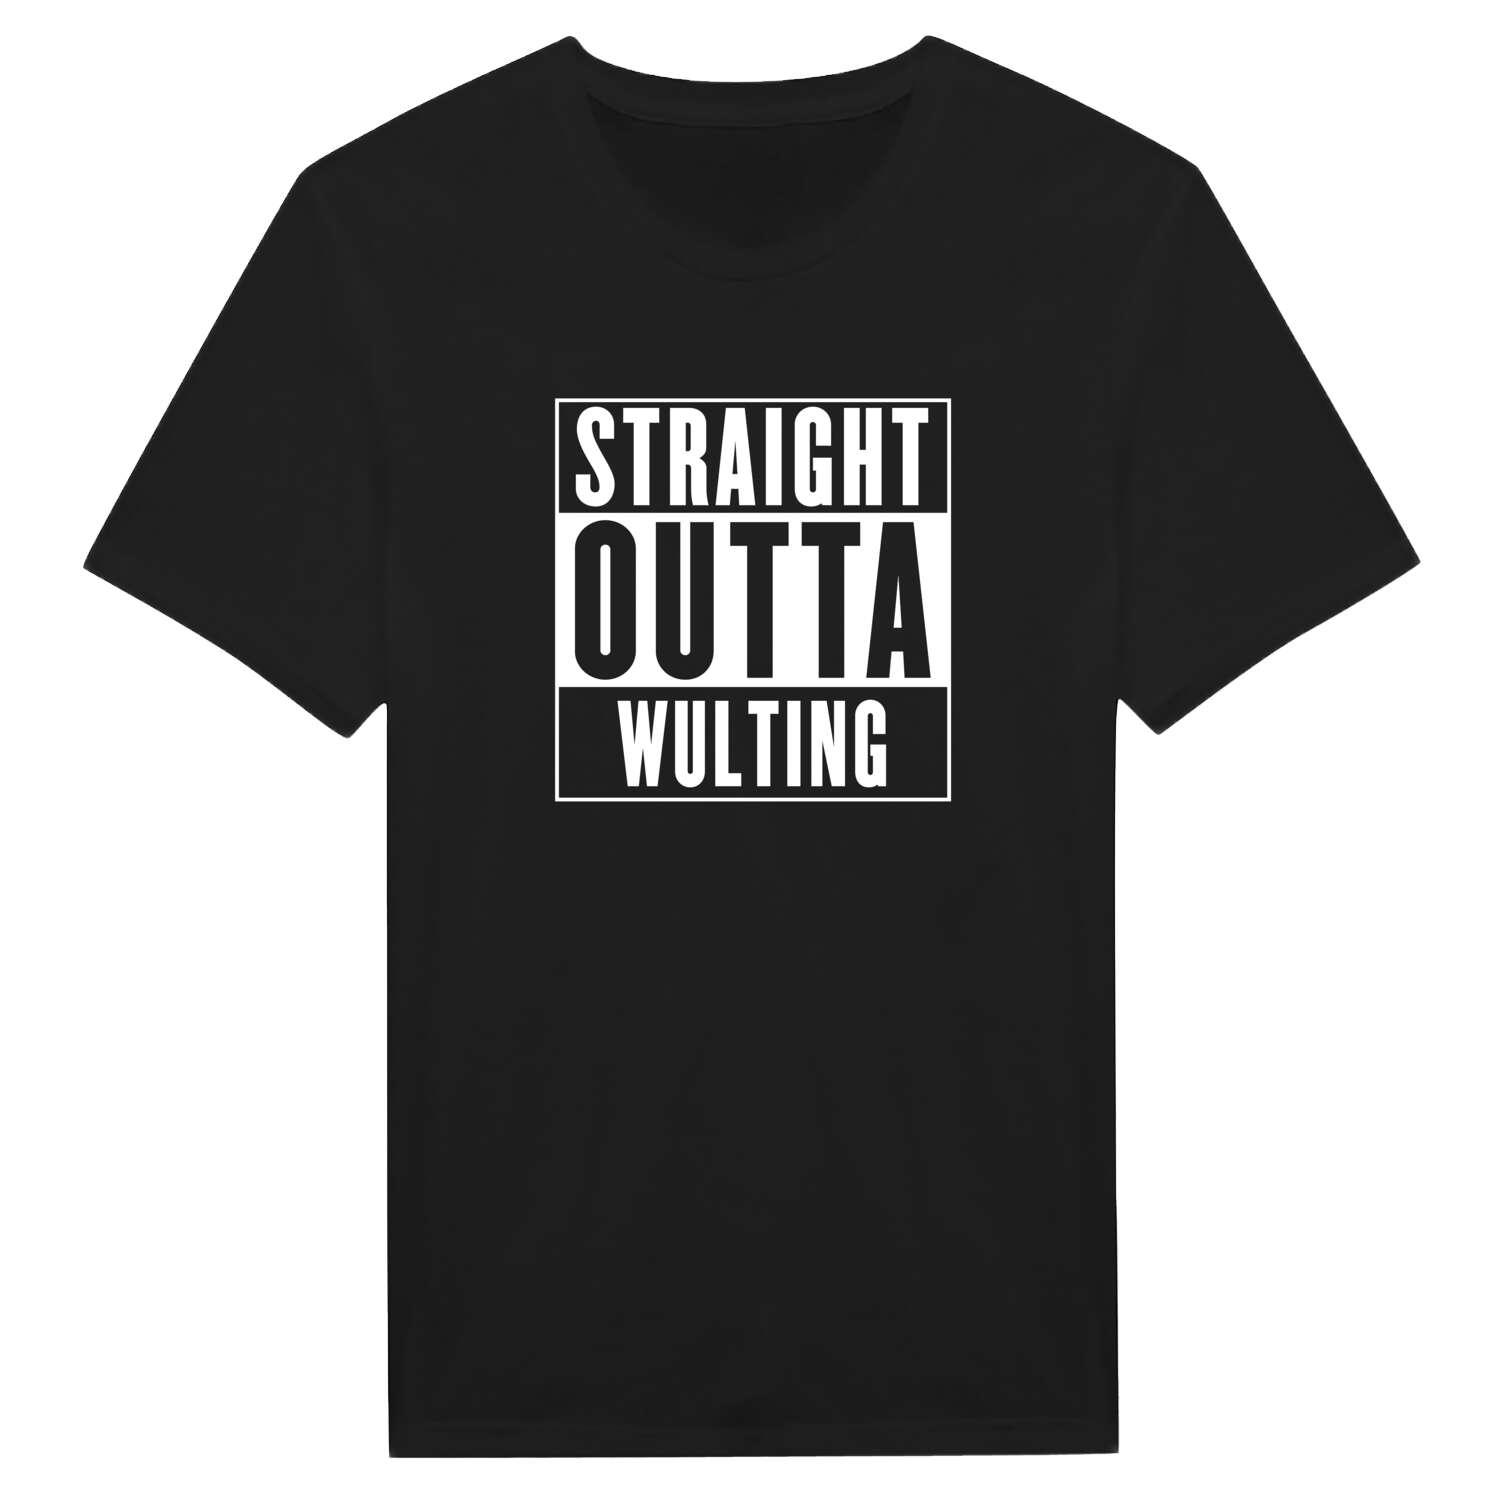 Wulting T-Shirt »Straight Outta«